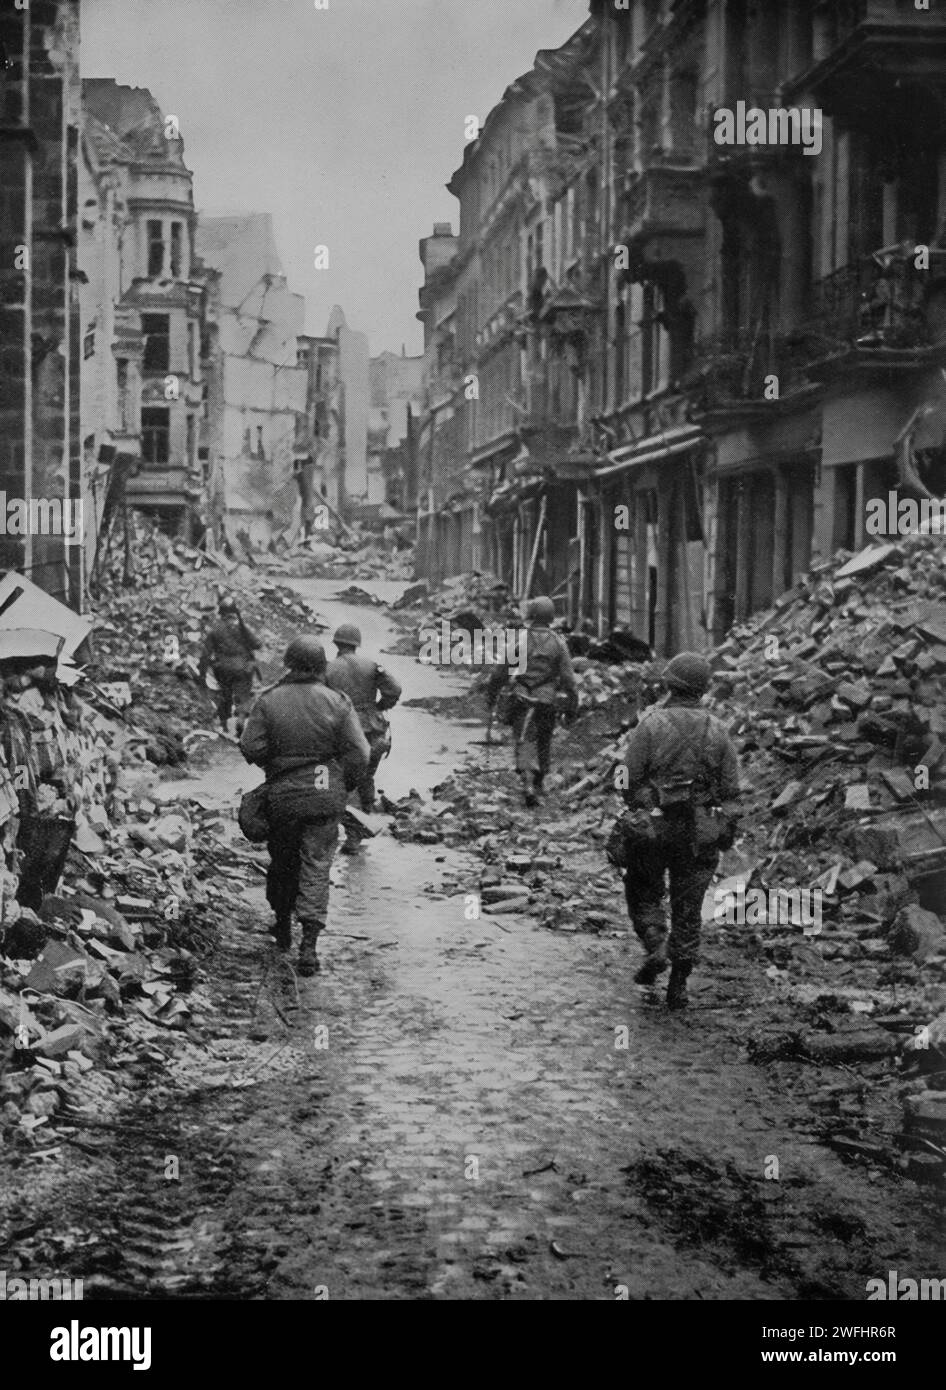 American troops patrolling the ruins of Bonn, in the German state of North Rhine-Westphalia, located on the banks of the Rhine. It was taken by the Allies on the 9th March 1945 as the Second World War gradually came to an end. Stock Photo